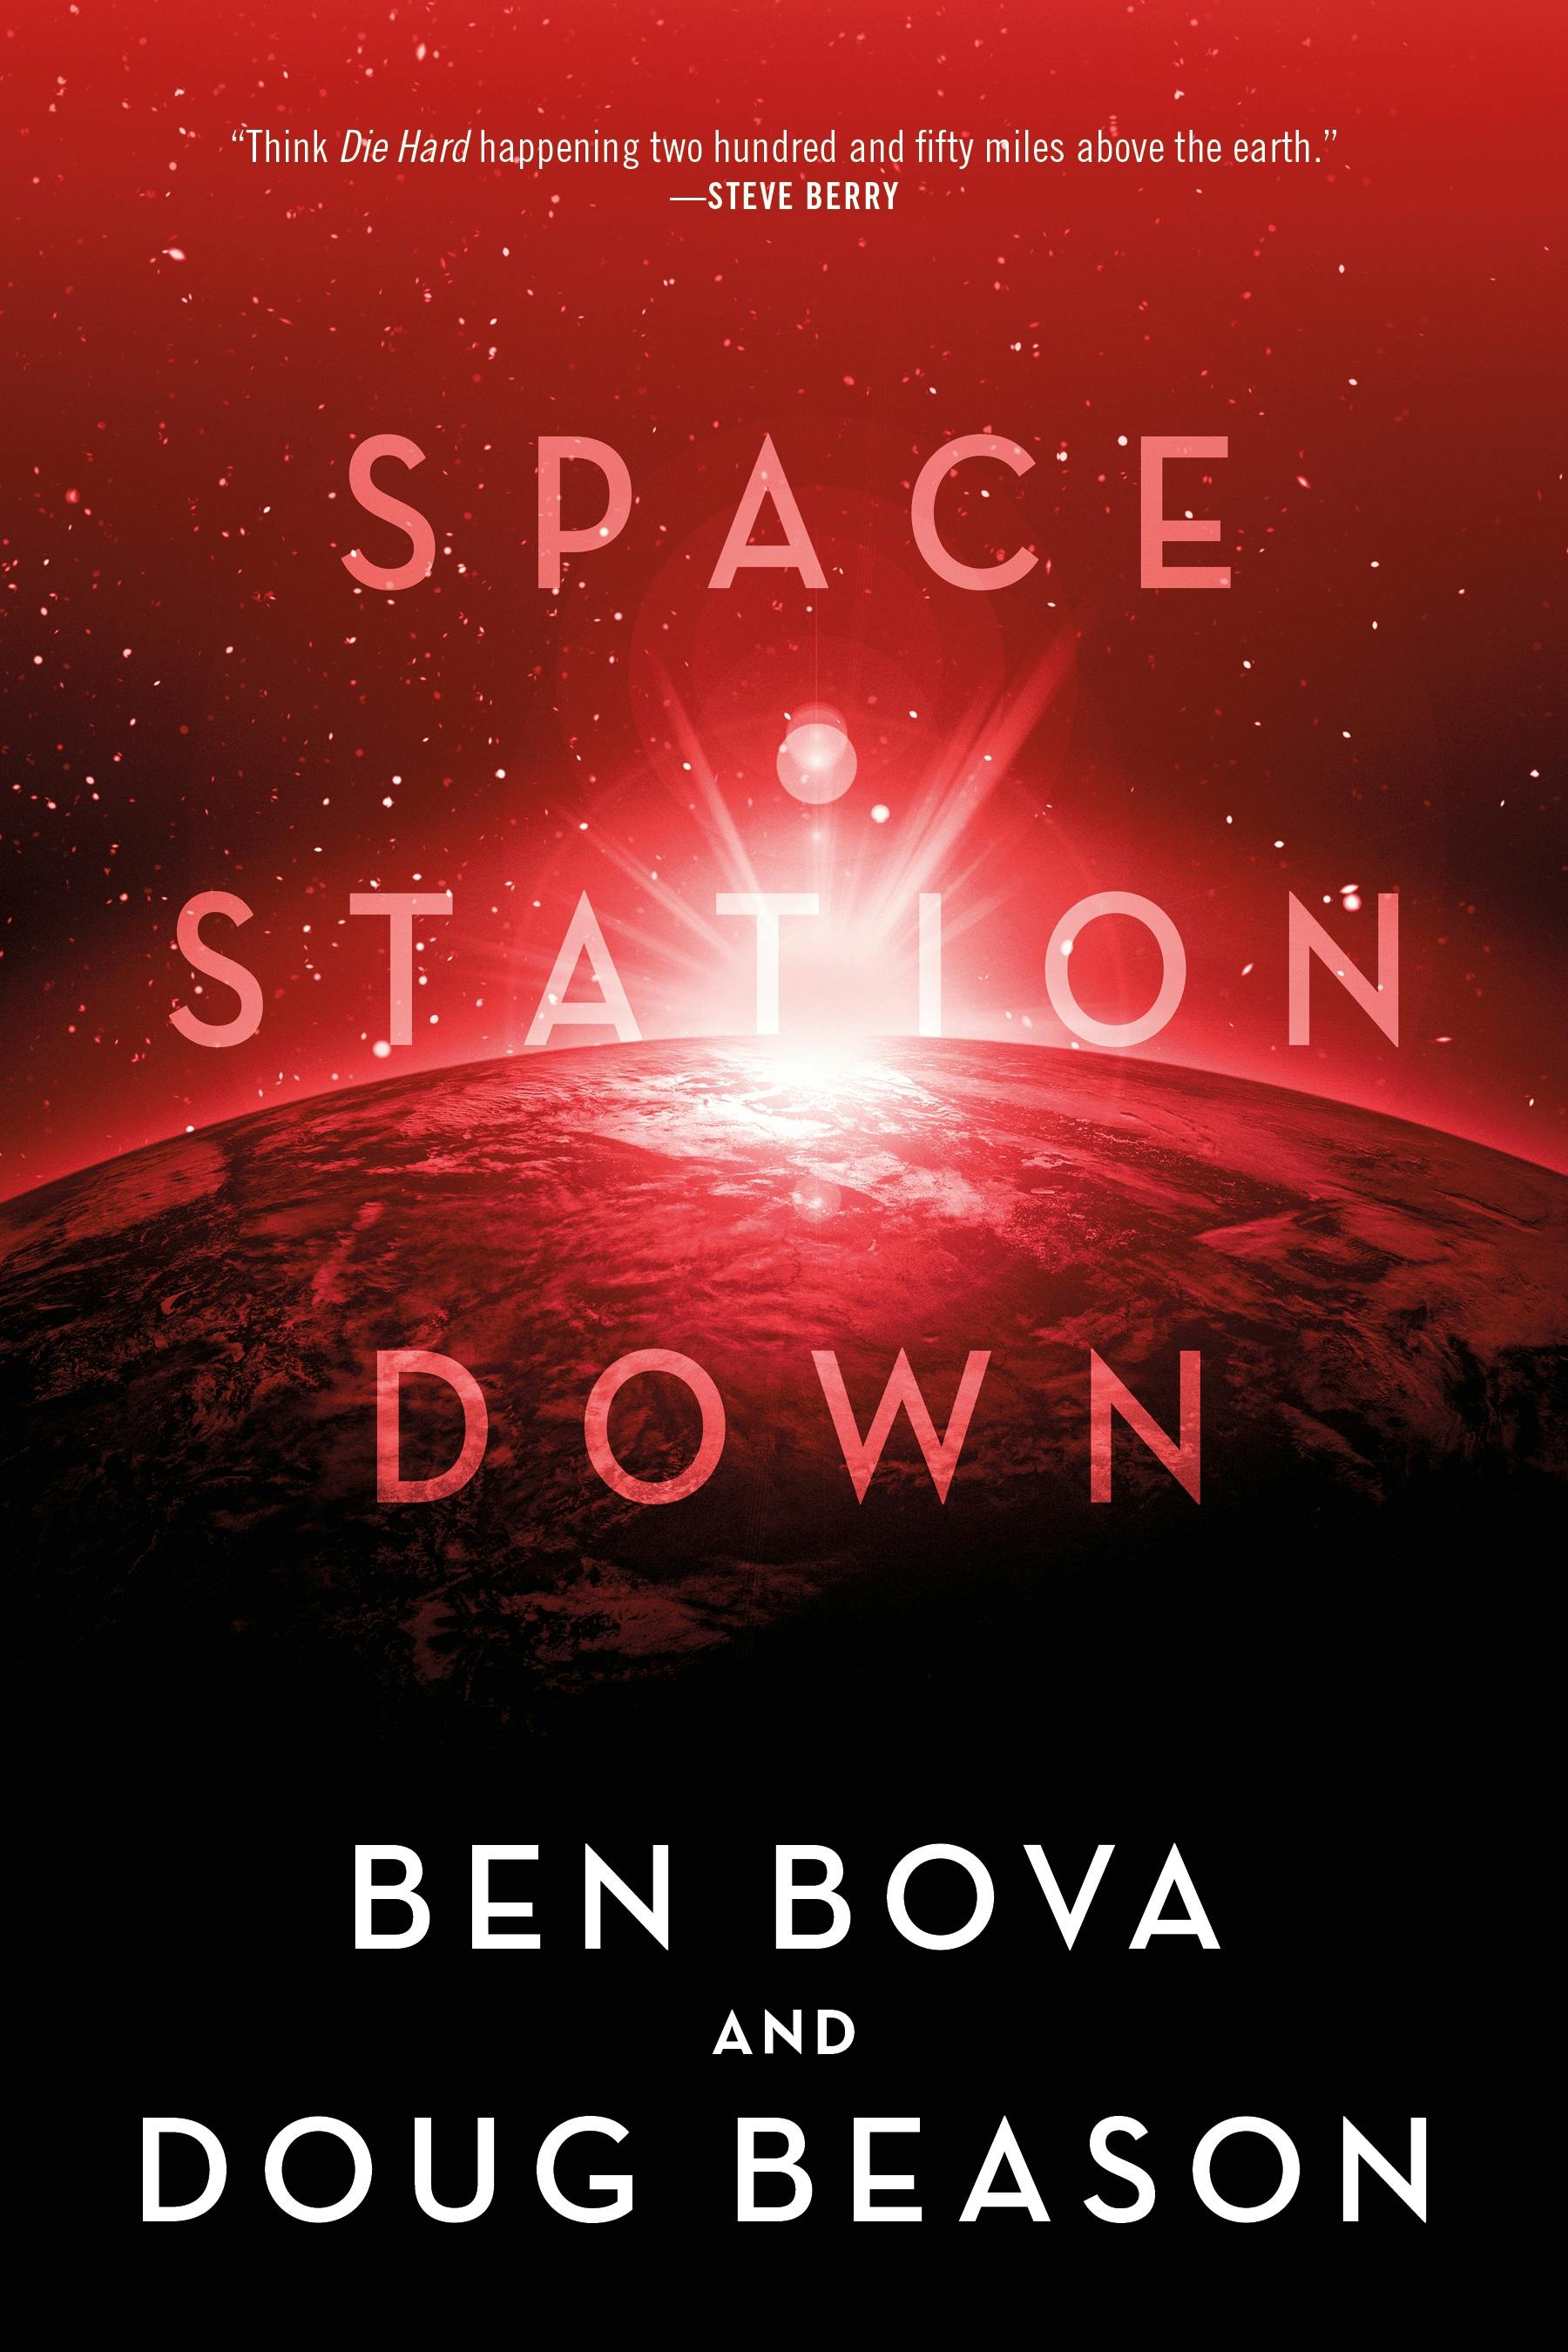 Cover for the book titled as: Space Station Down